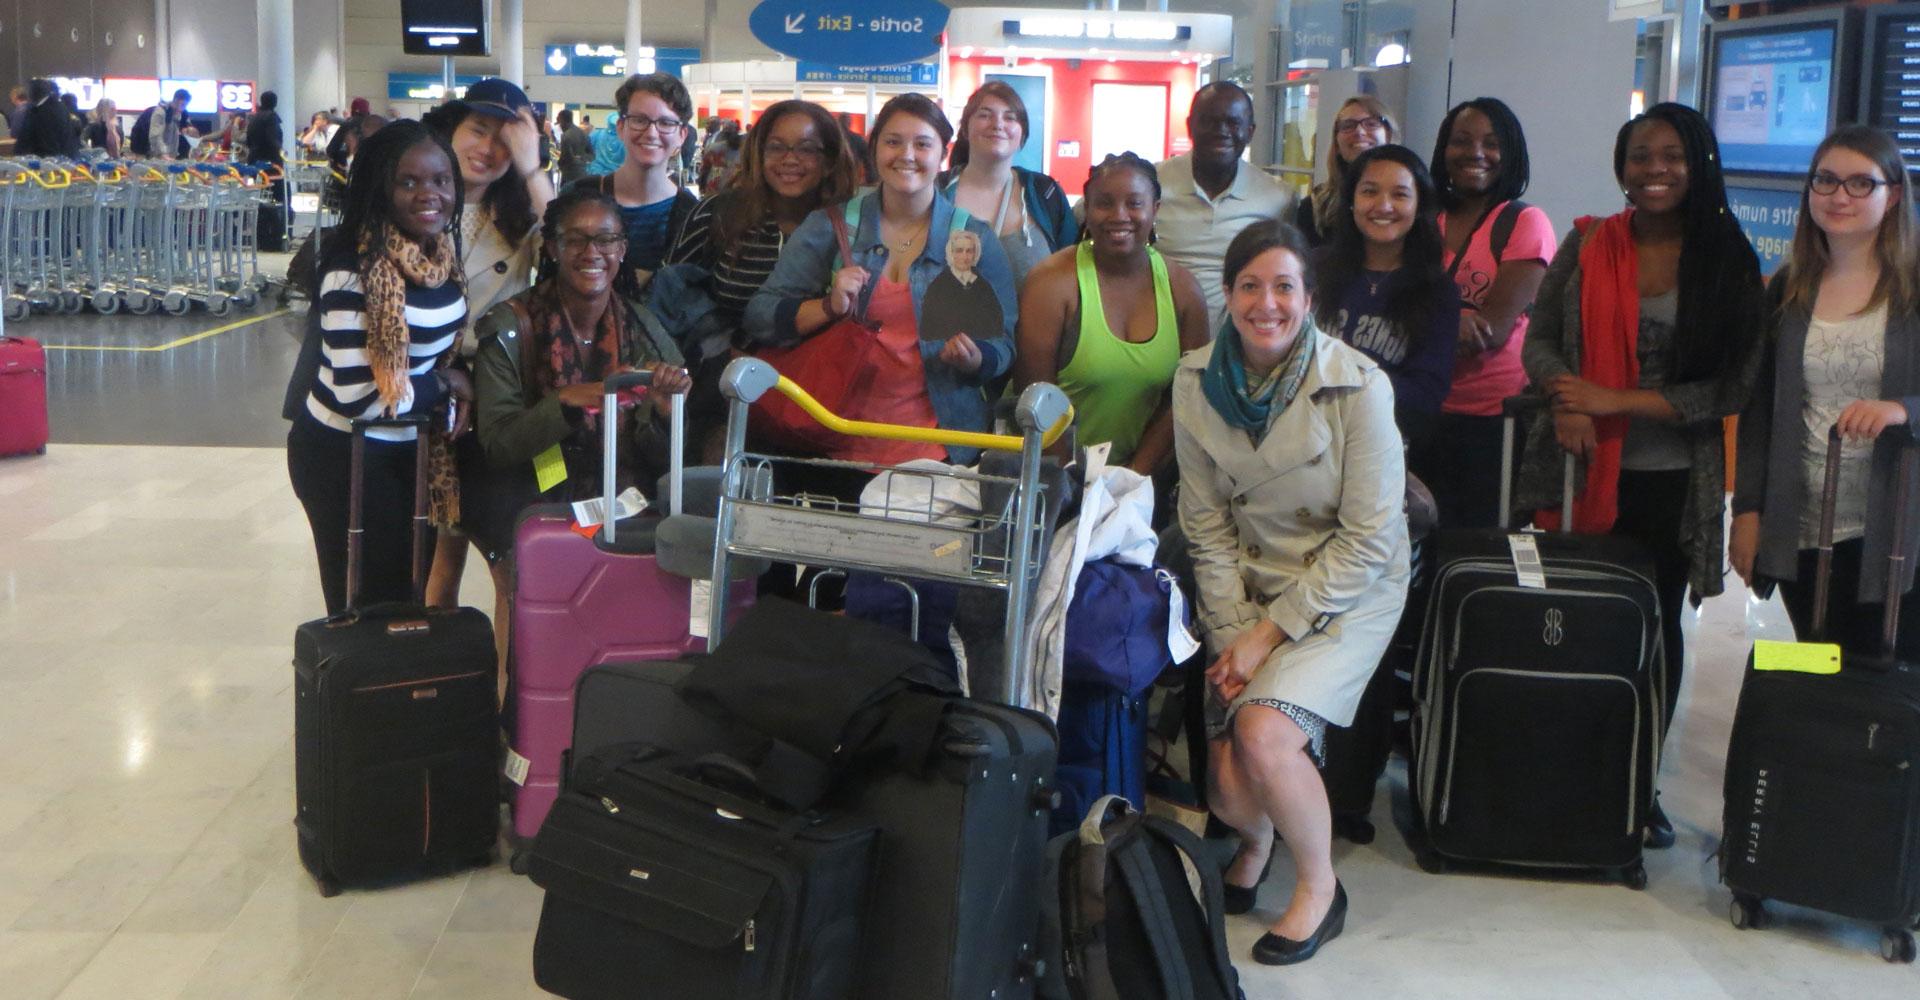 Students and faculty pose for a group photo on their Global Awareness trip to Ireland.